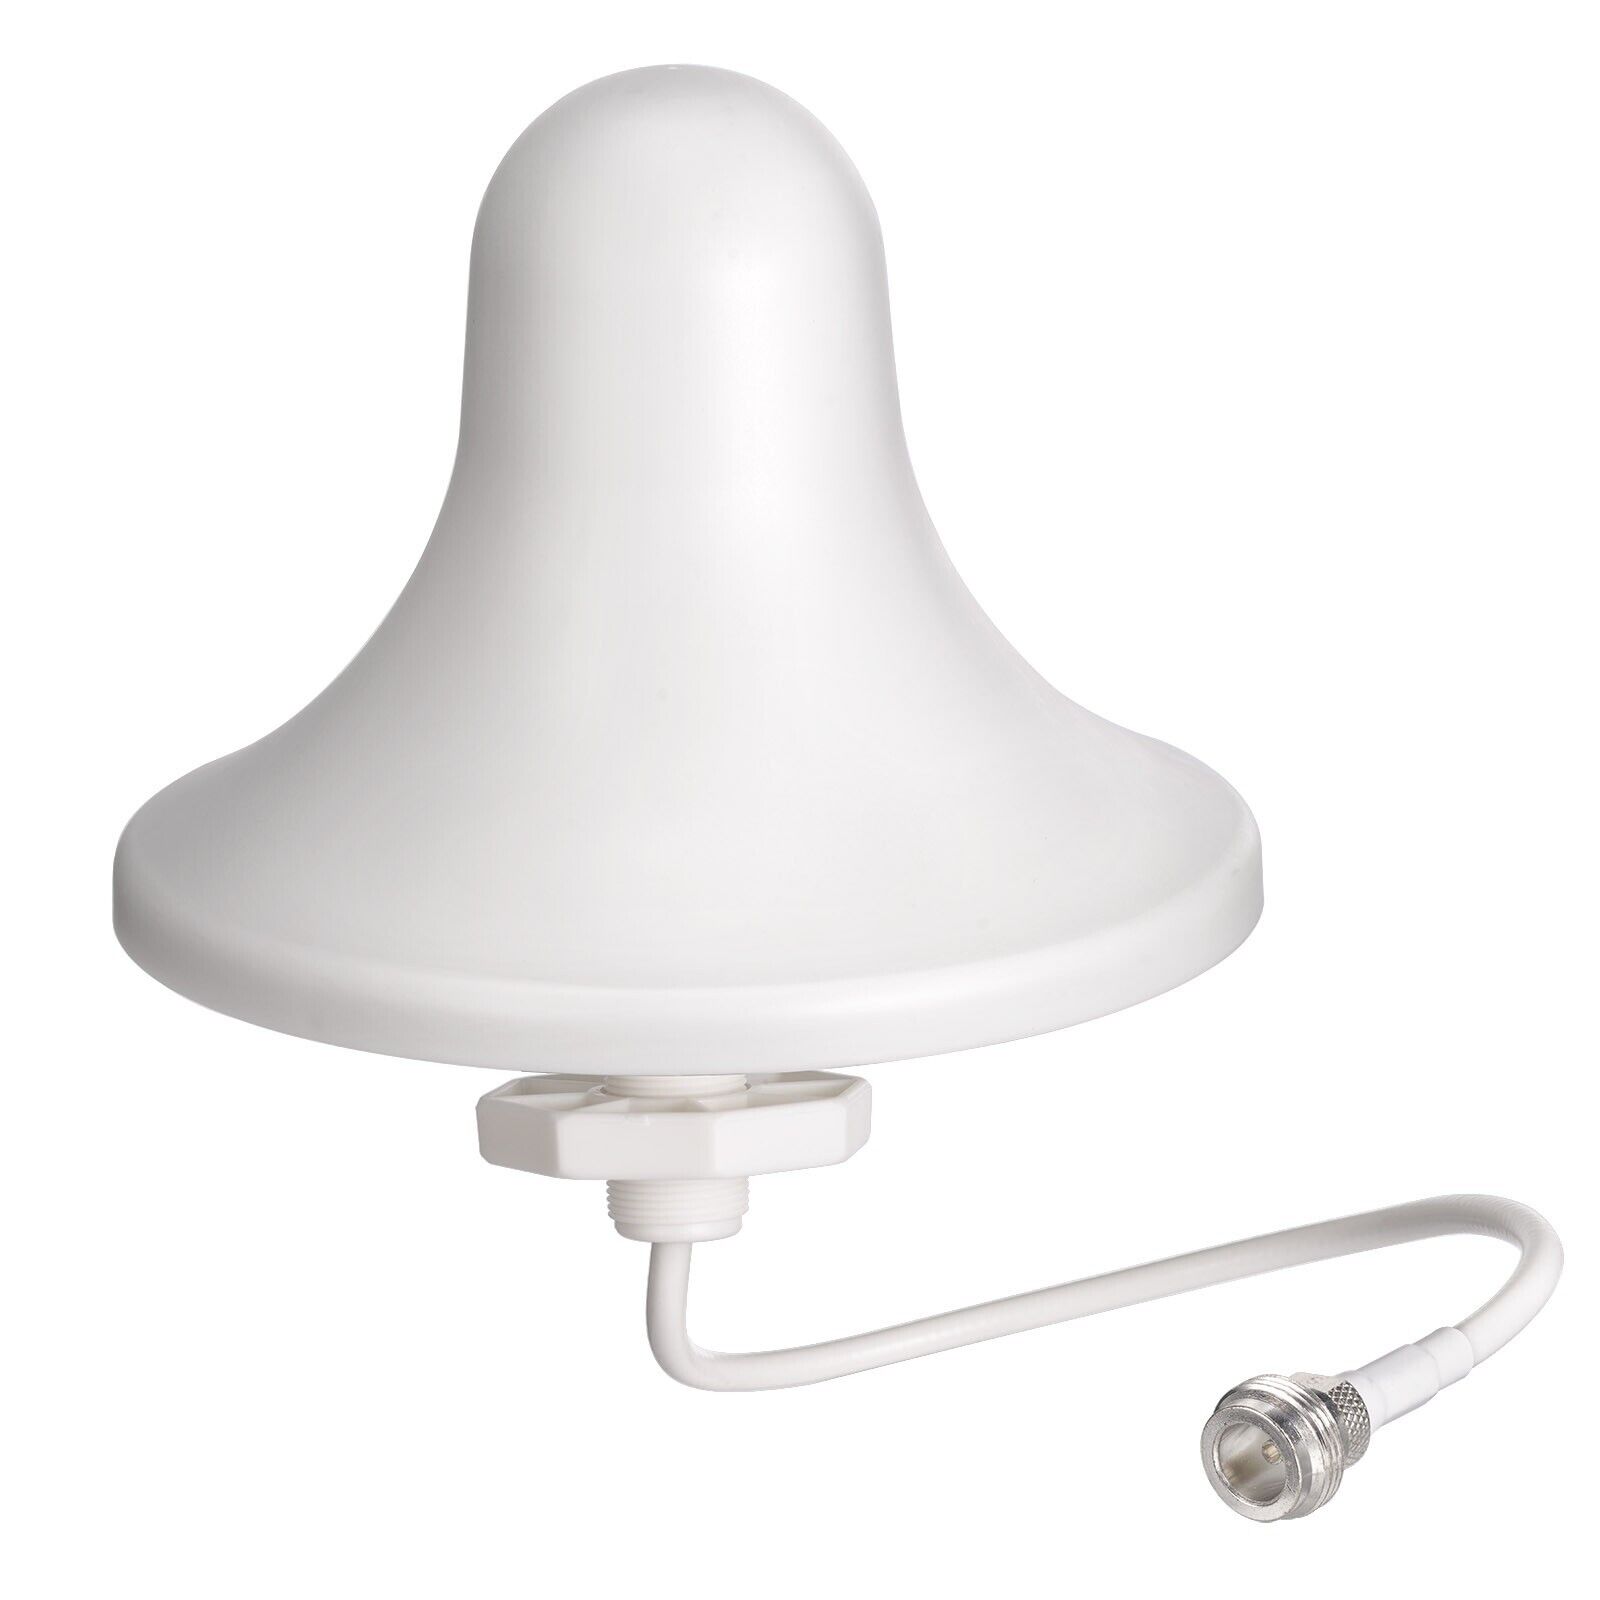 698MHz - 2600MHz 4G LTE 3G Ceiling Mount Dome Antenna with N Female Connector